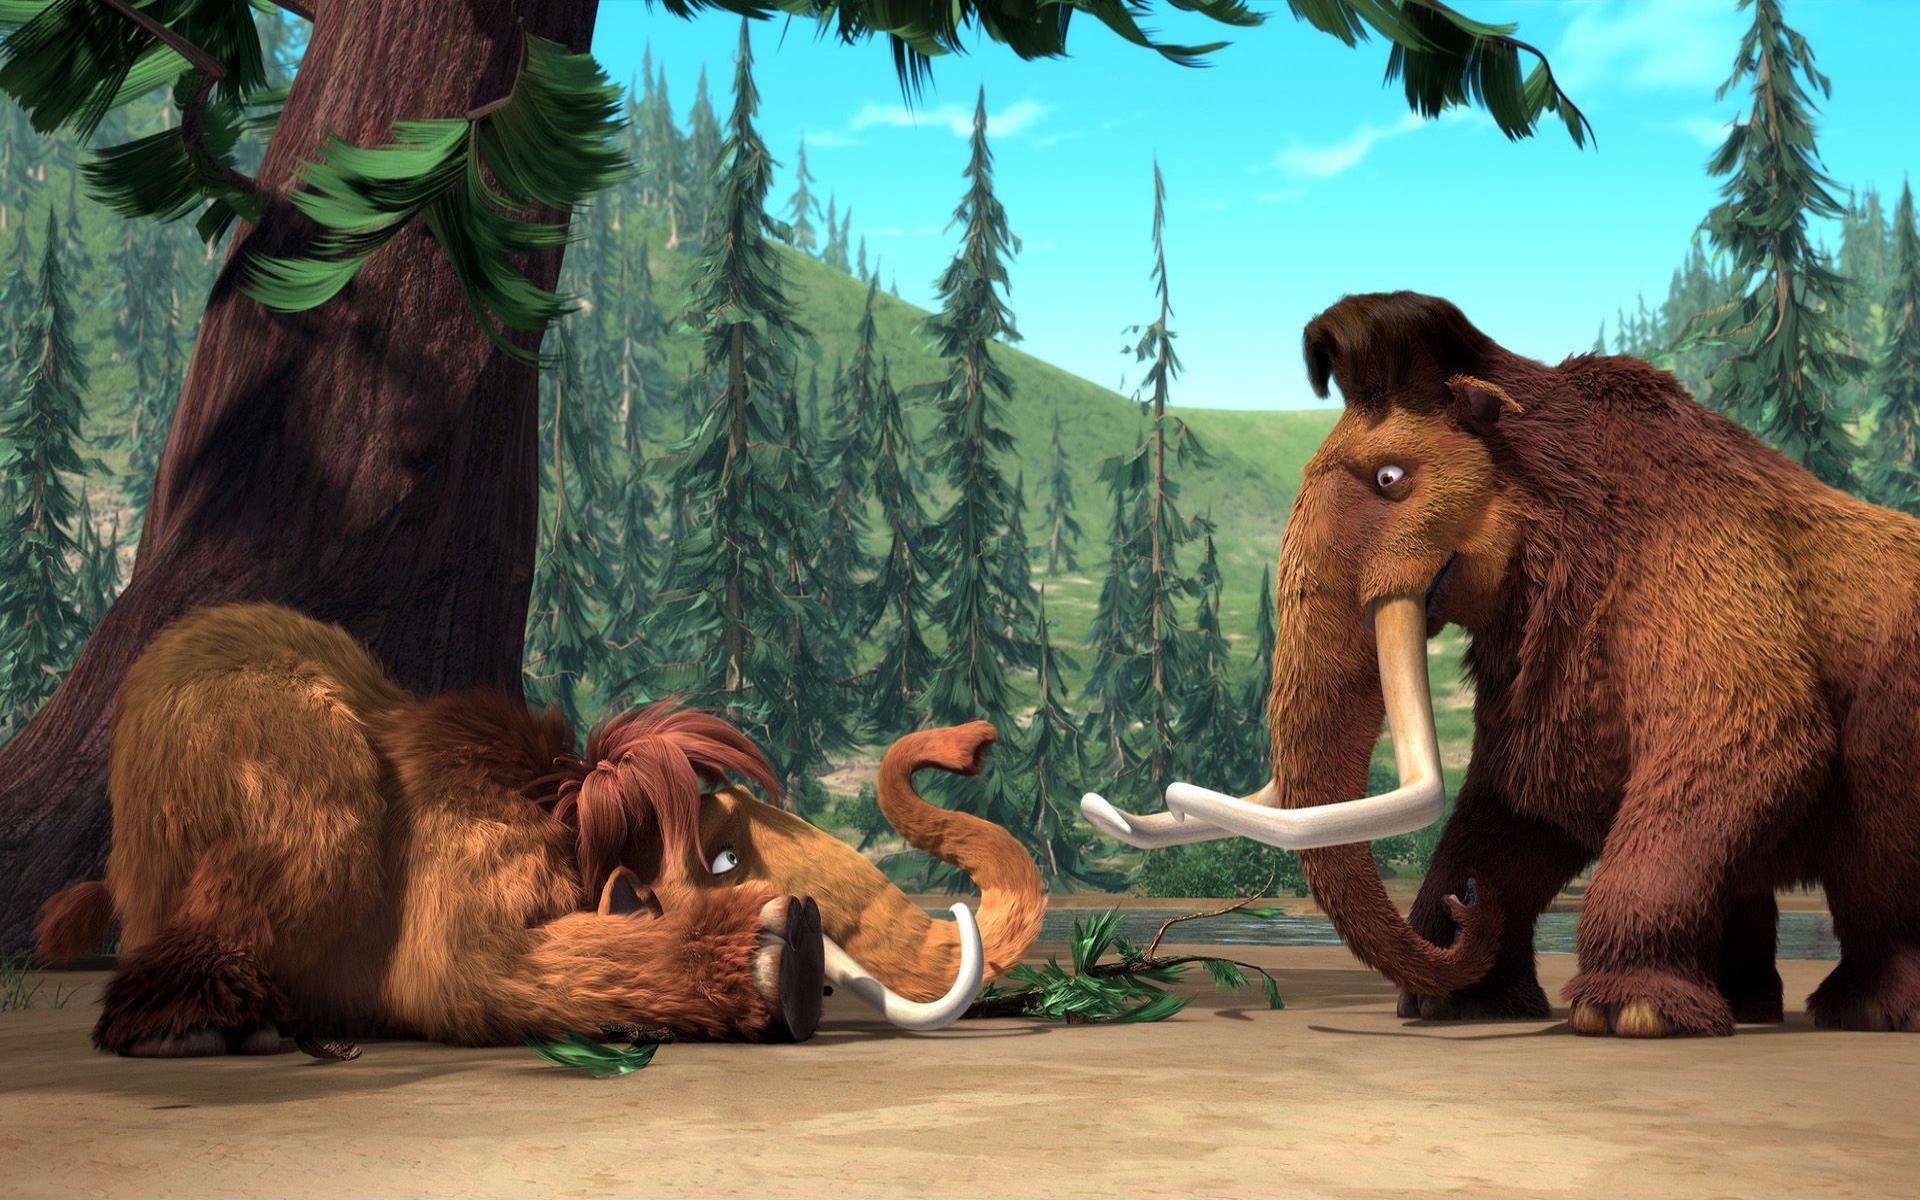 Ice Age wallpapers HD for desktop backgrounds